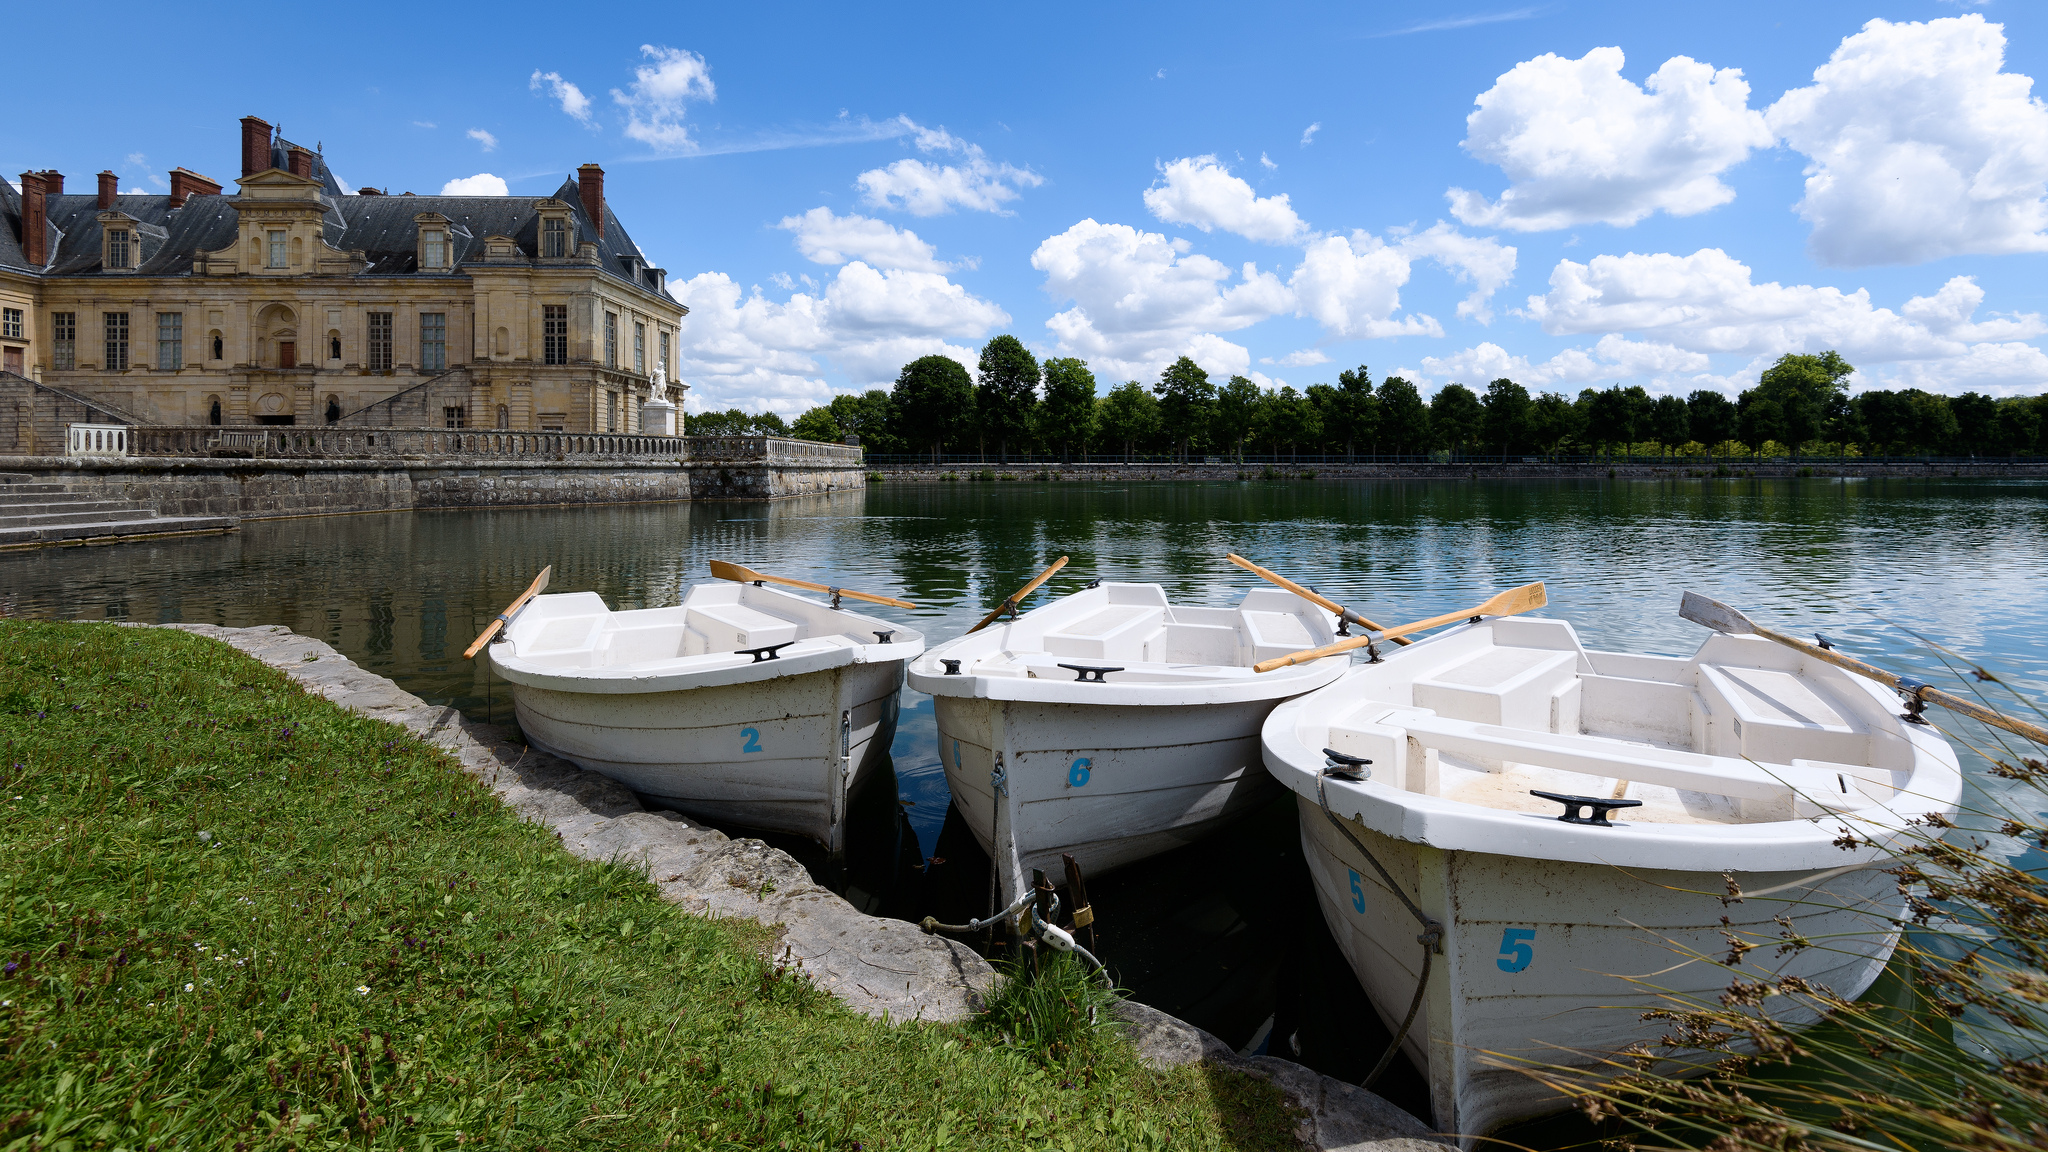 Rowboats at the Palace of Fontainebleau or Château de Fontainebleau, France